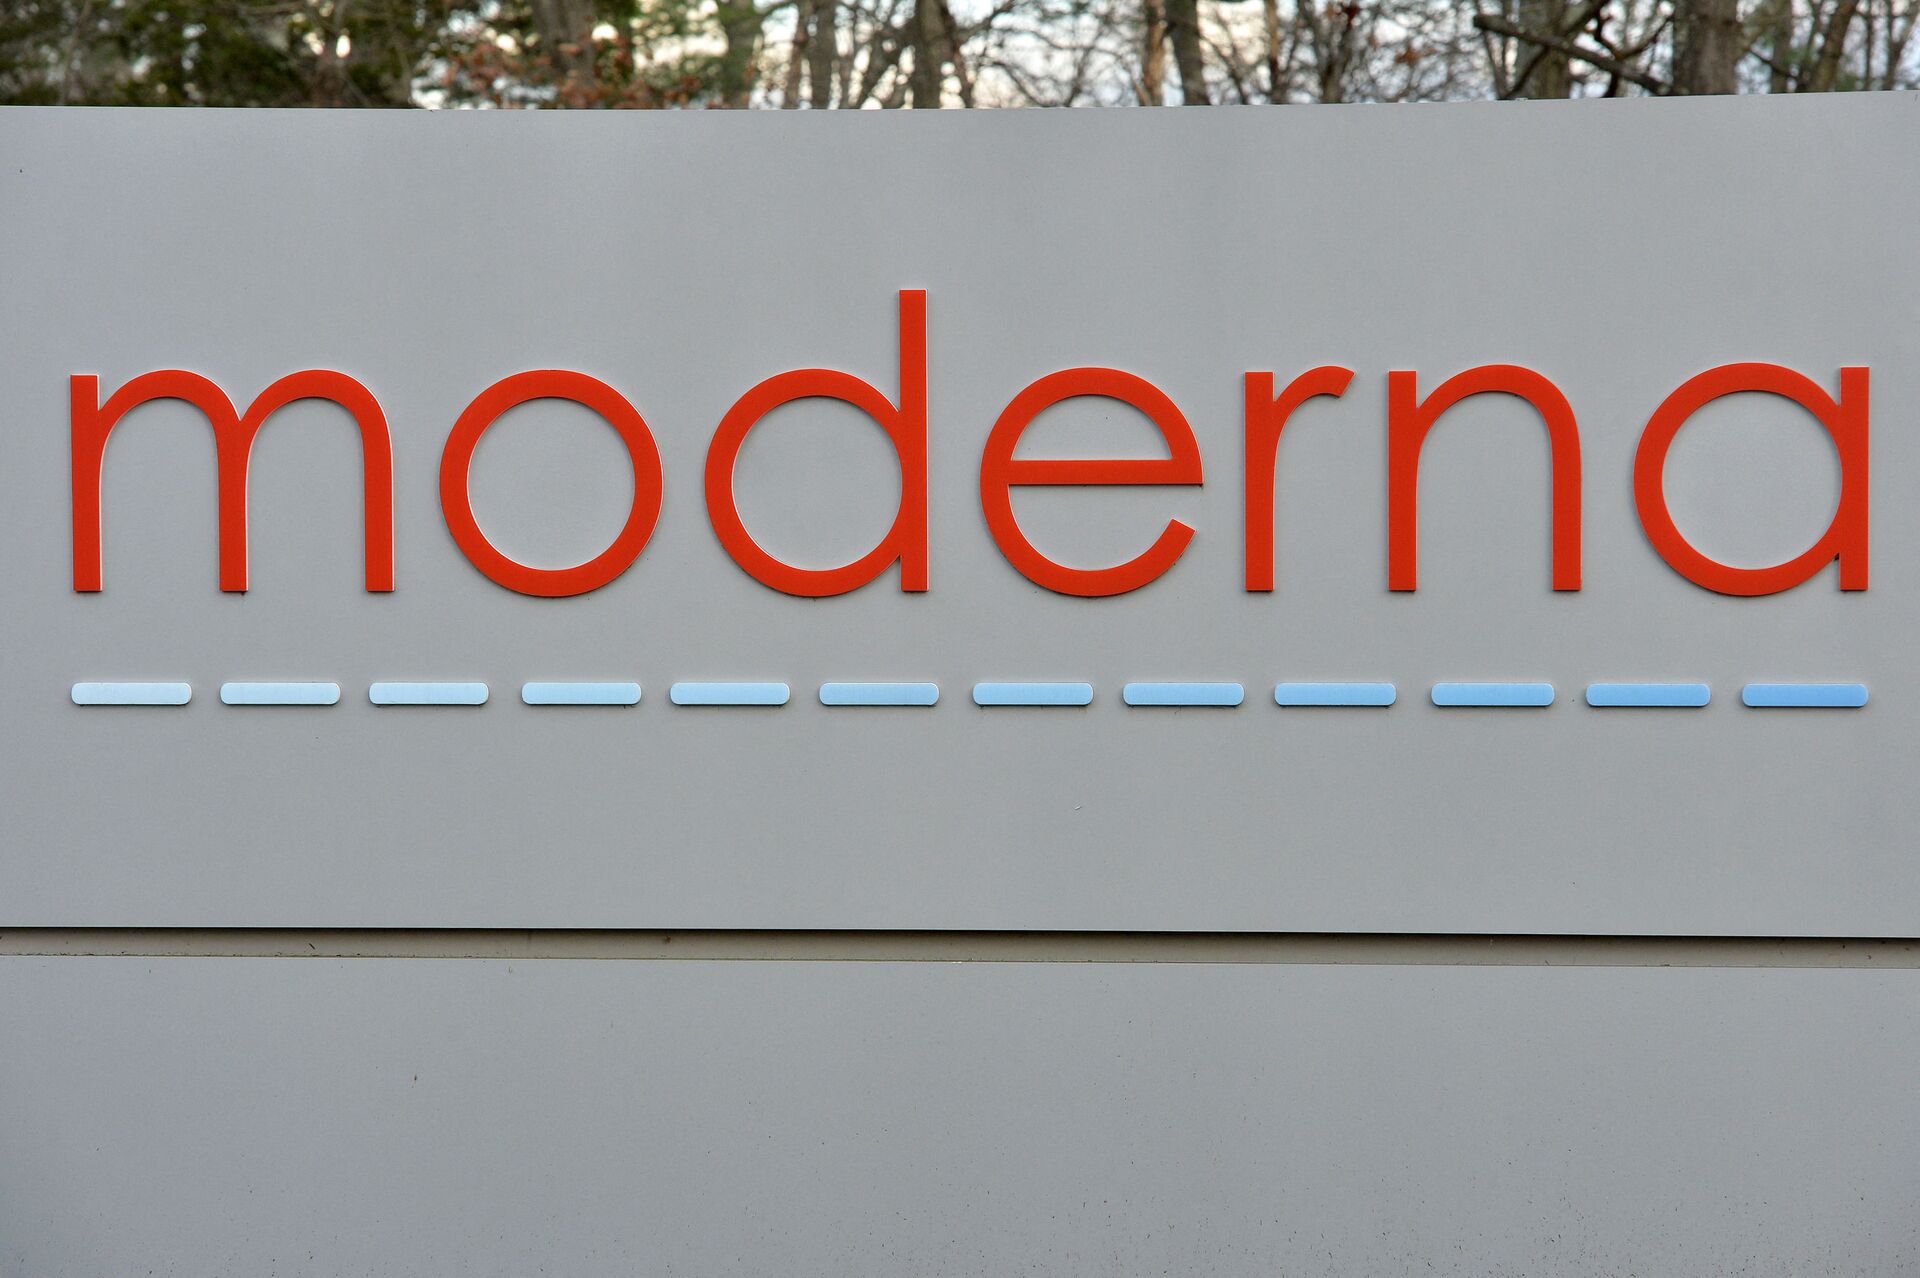 In this file photo the Moderna logo is seen at the Moderna campus in Norwood, Massachusetts on on December 2, 2020, where the biotechnology company is mass producing its Covid-19 vaccine. - US biotech firm Moderna said on July 7, 2021 it had dosed its first participants in a human study of an mRNA vaccine that targets multiple strains of influenza. The company intends to recruit 180 adults in the United States for the Phase 1/2 portion of the trial to evaluate the safety and strength of immune response to the shot, called mRNA-1010. - Sputnik International, 1920, 13.10.2021